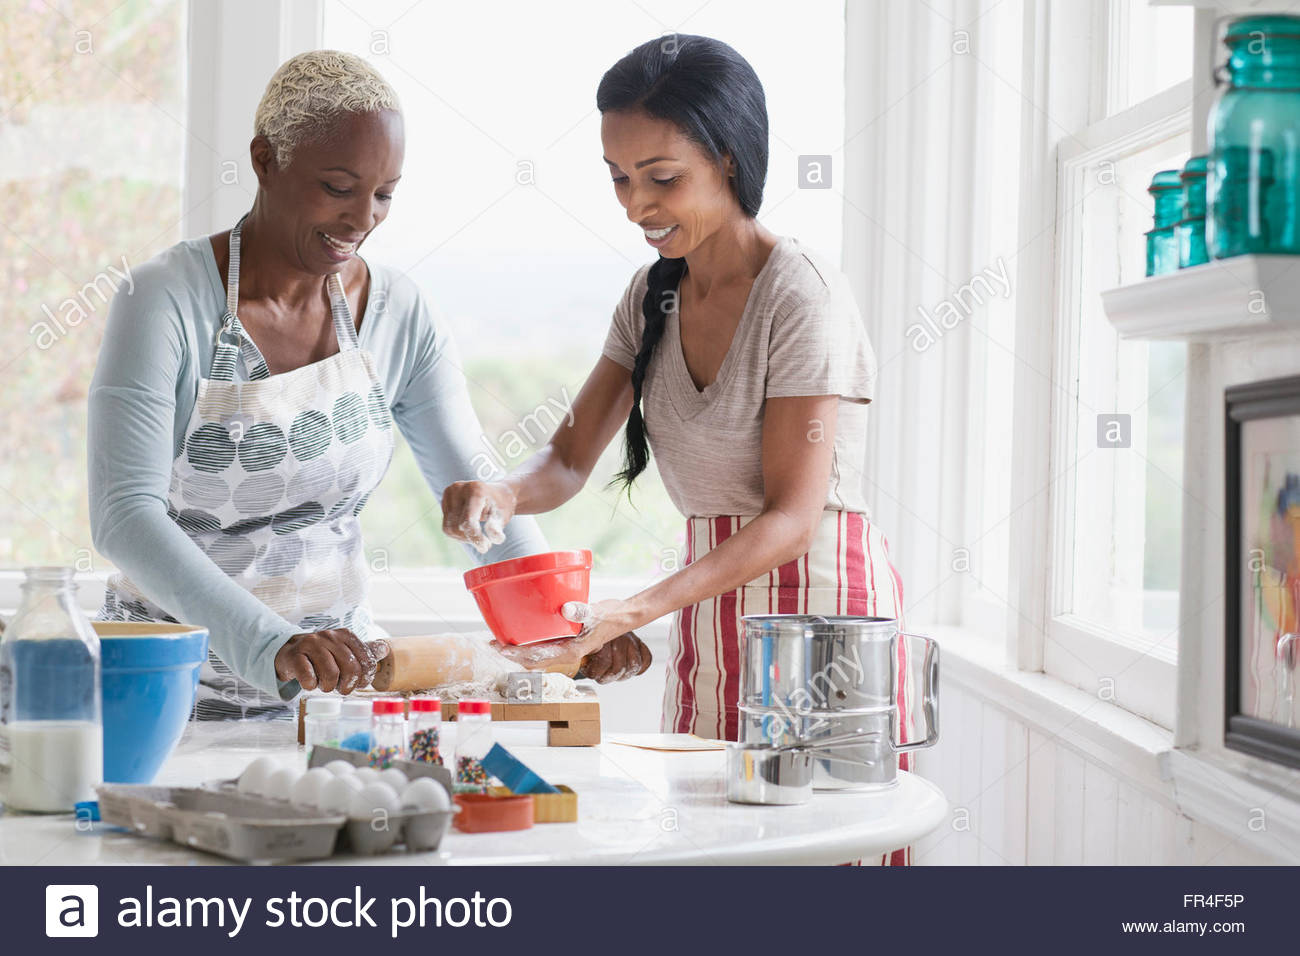 mother and adult daughter making baked goods Stock Photo